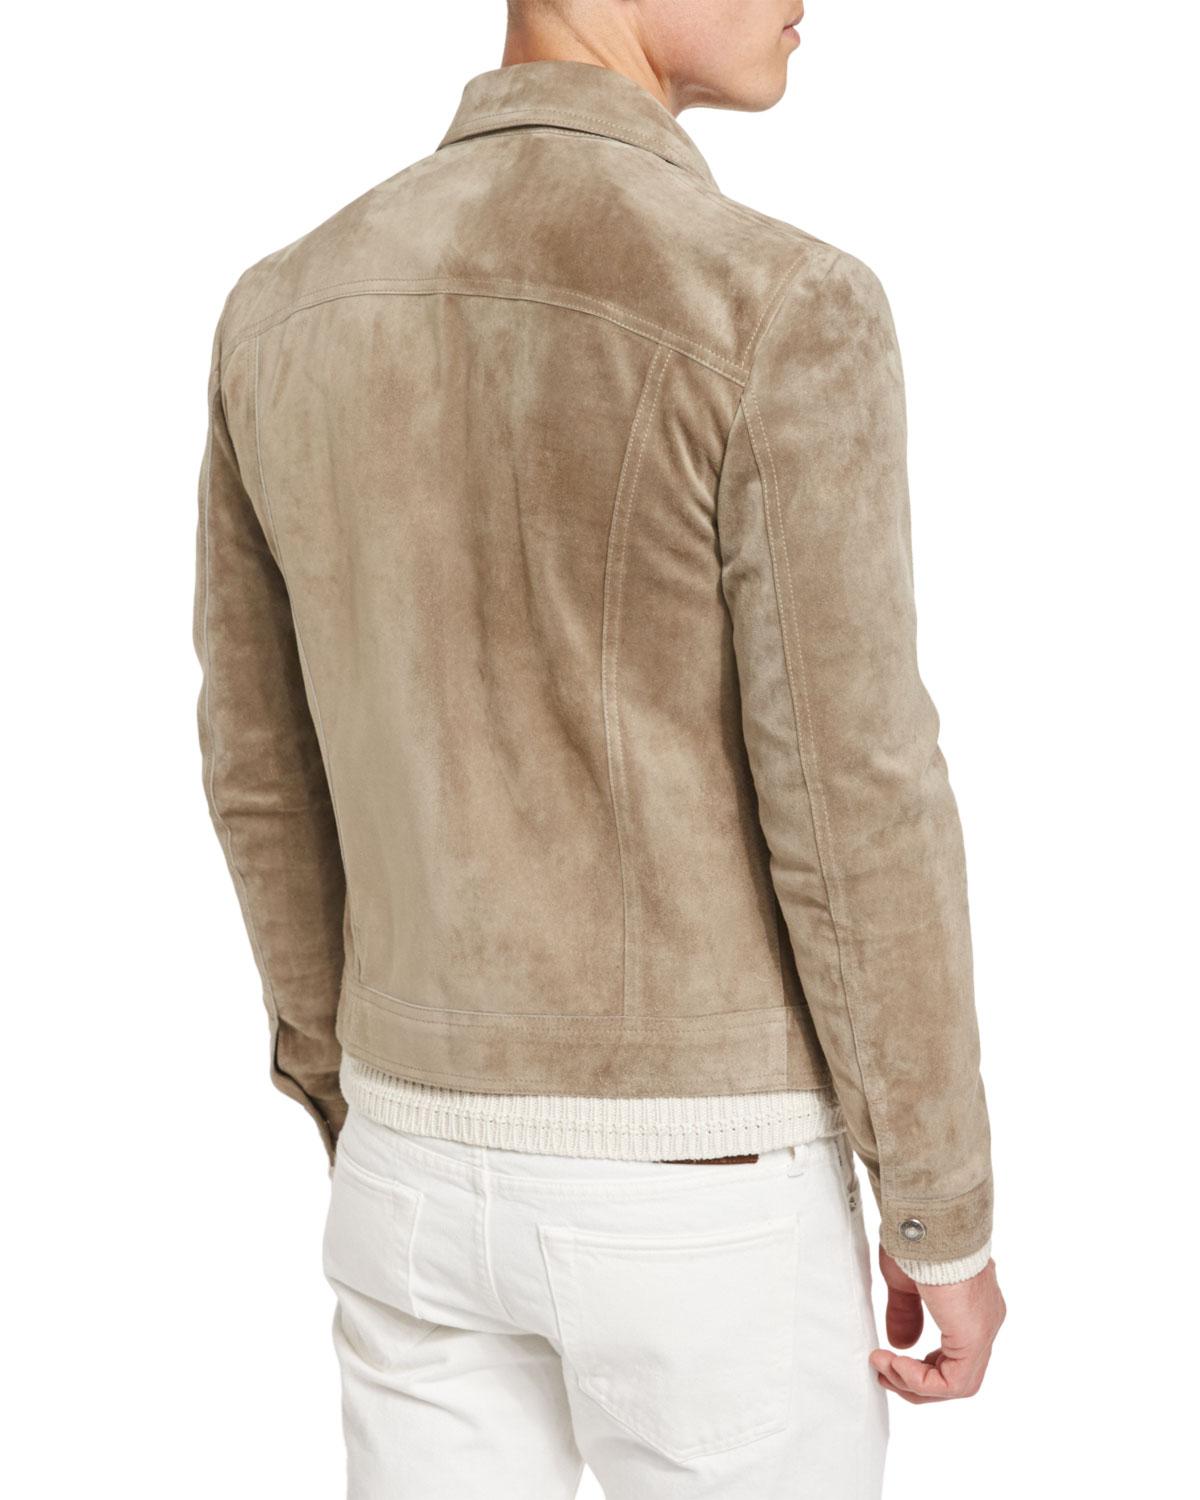 Lyst - Tom Ford Cashmere Suede Trucker Jacket W/zip Pockets in Natural ...